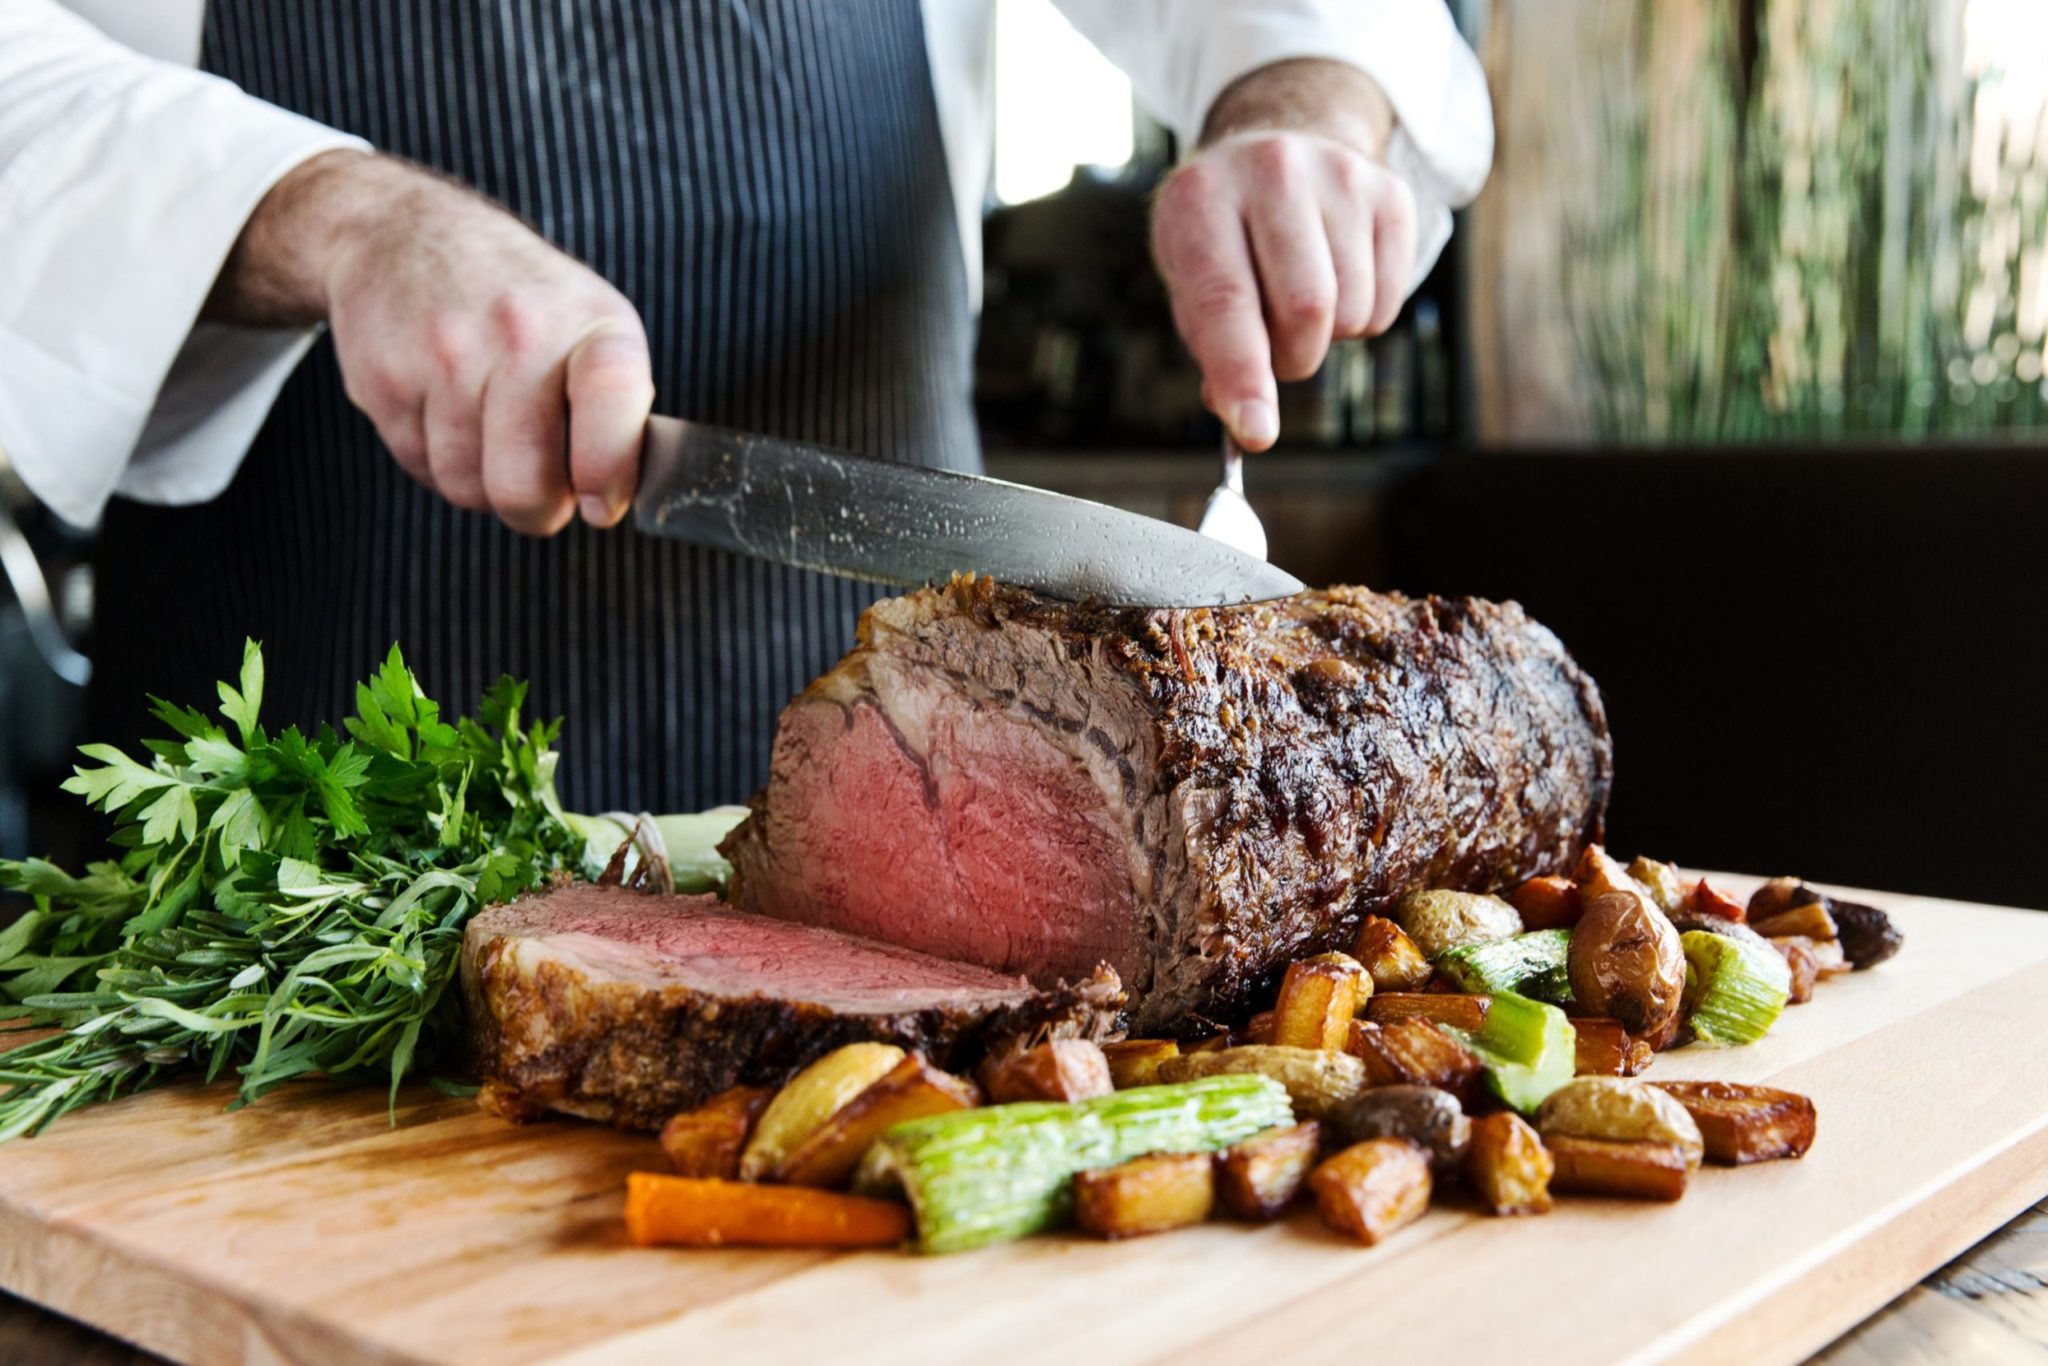 Carving prime rib at City Perch. Photograph courtesy of City Perch.